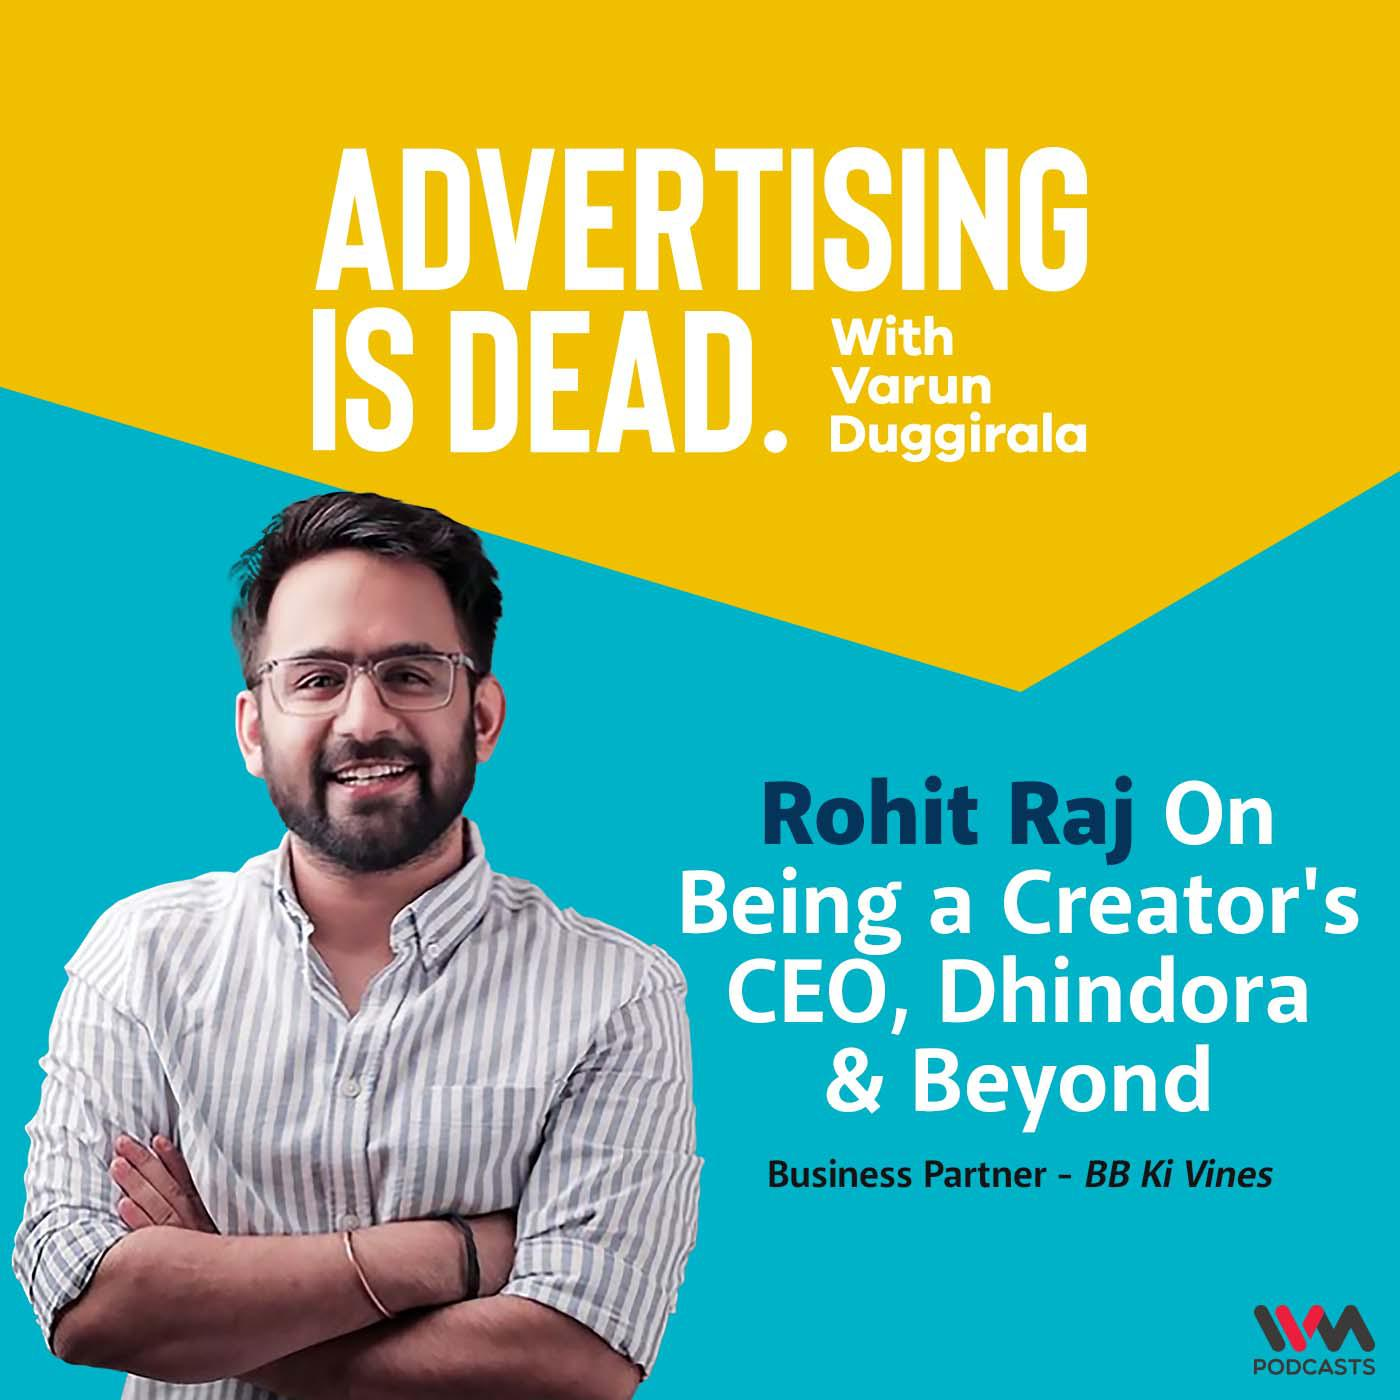 Rohit Raj On Being a Creator’s CEO, Dhindora & Beyond